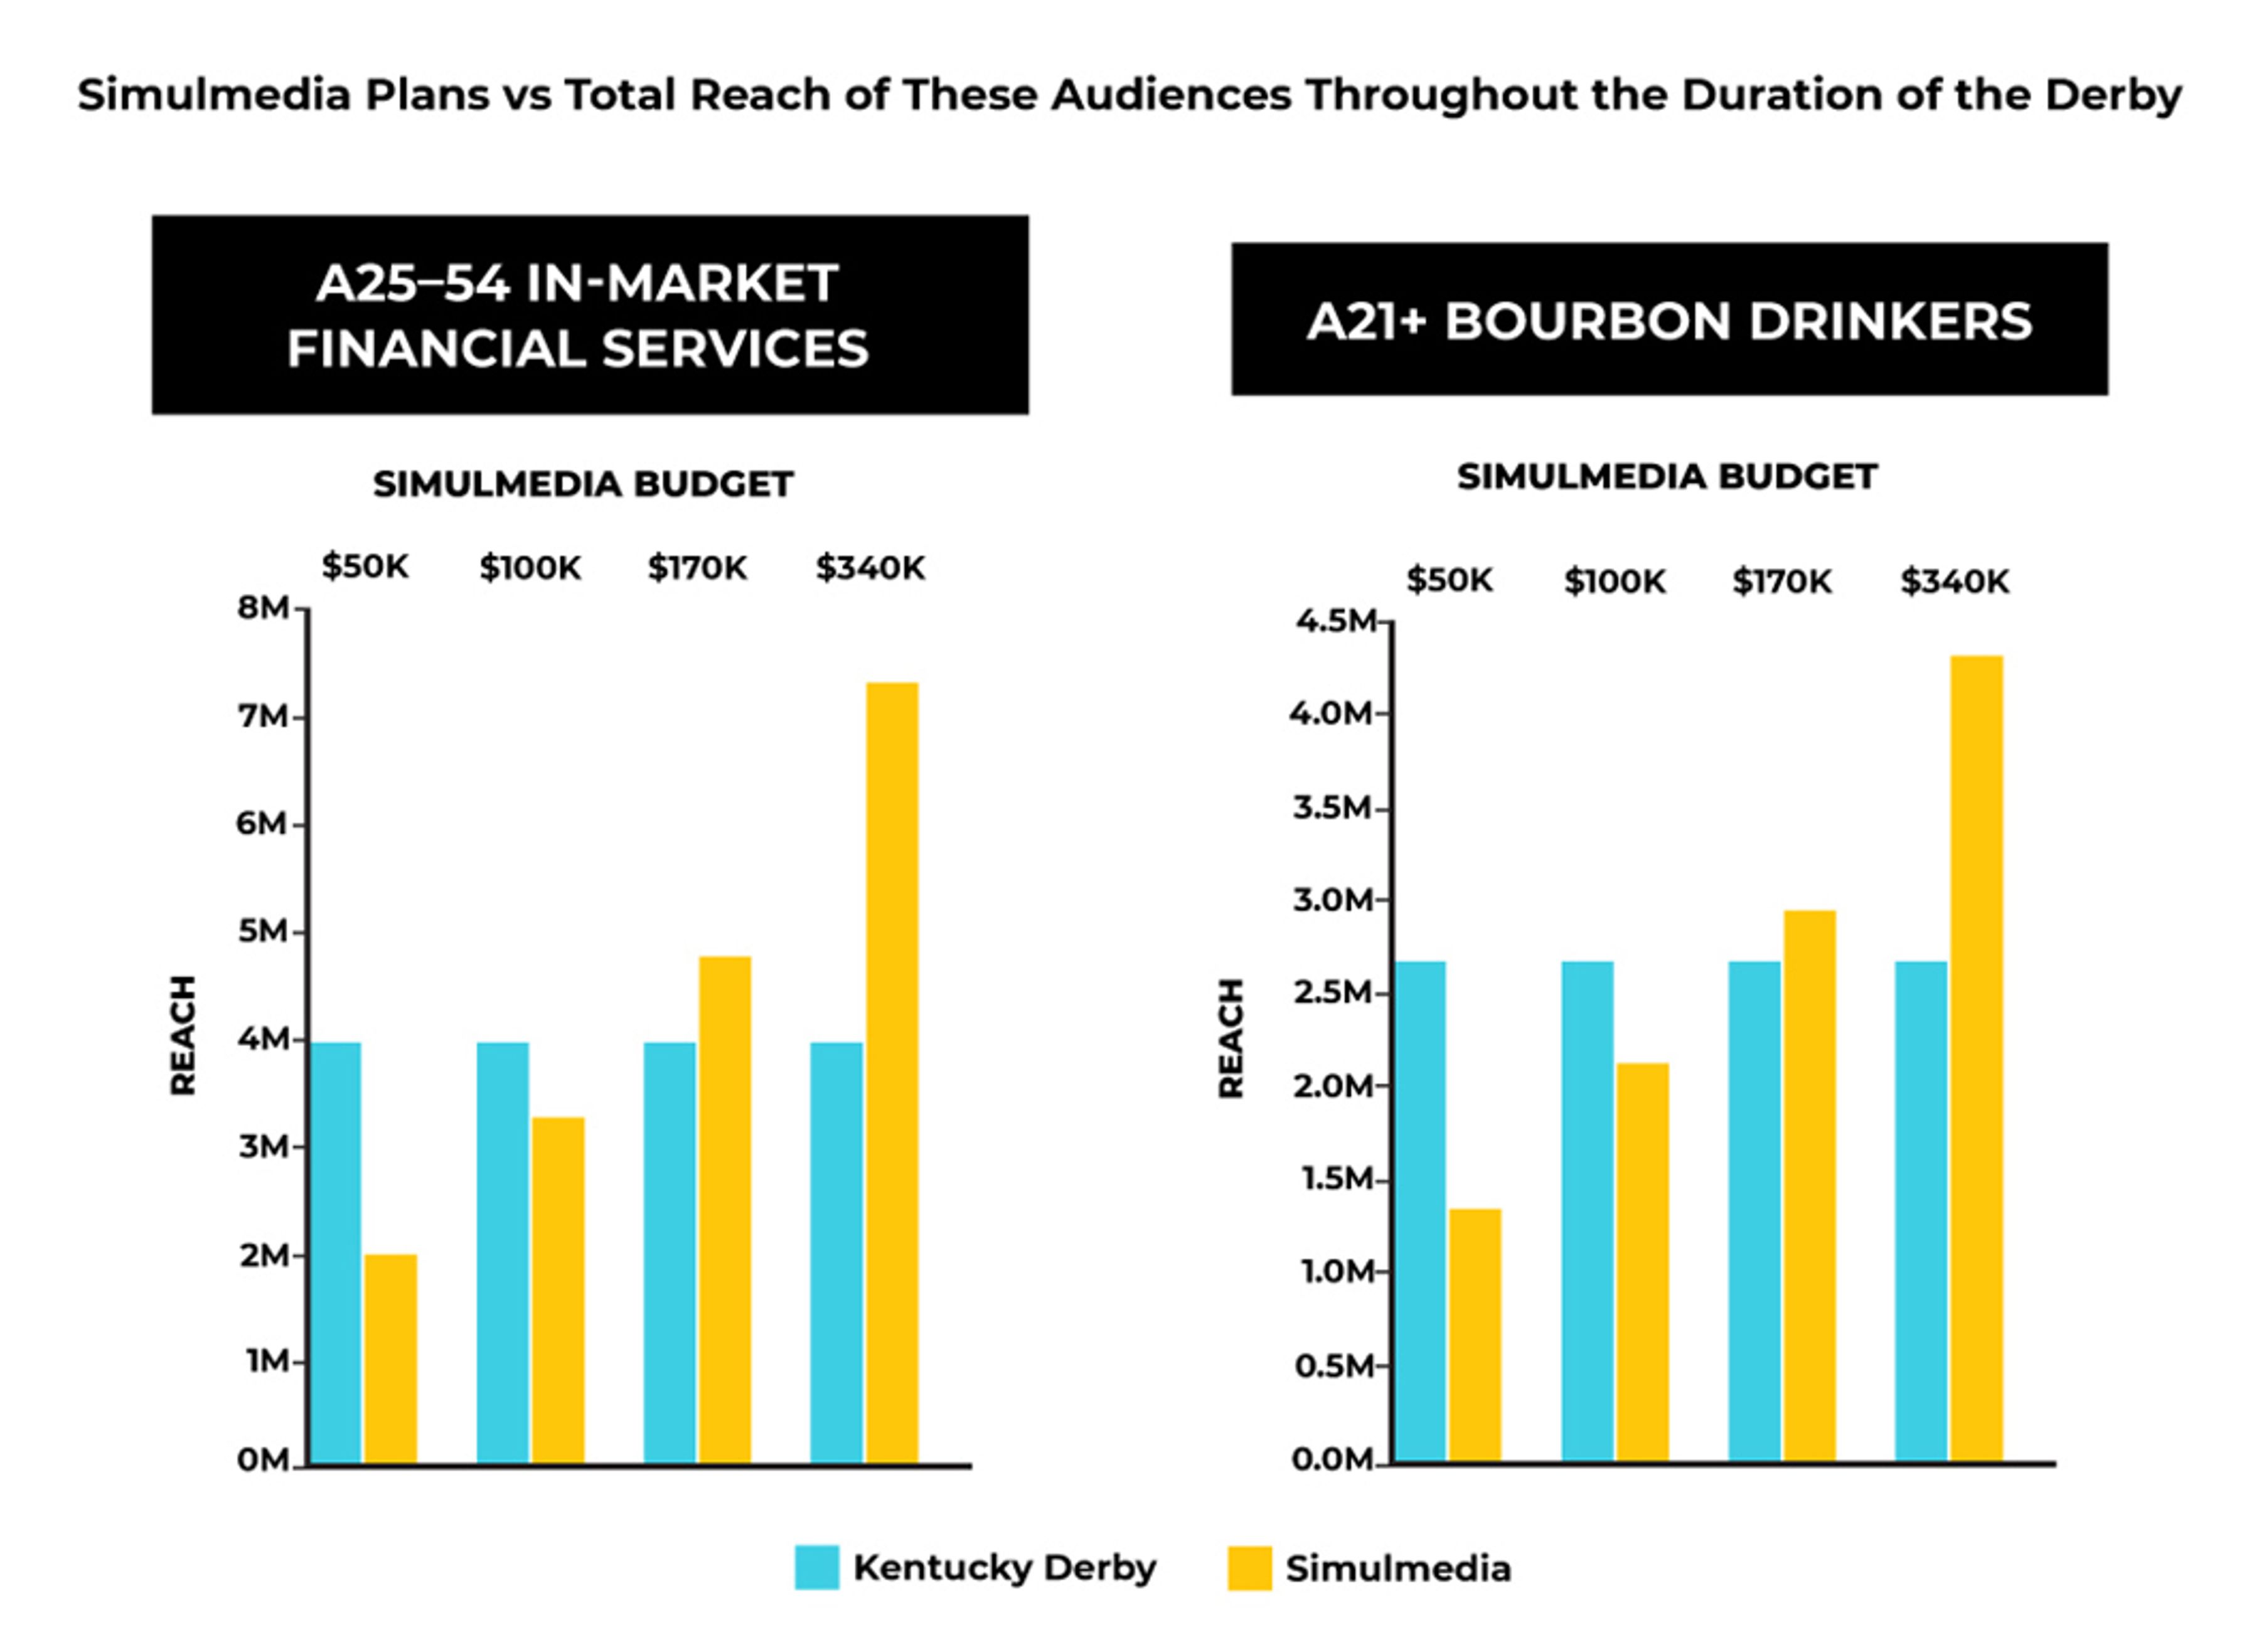 Simulmedia plans versus total reach of select audiences throughout the duration of the Derby.